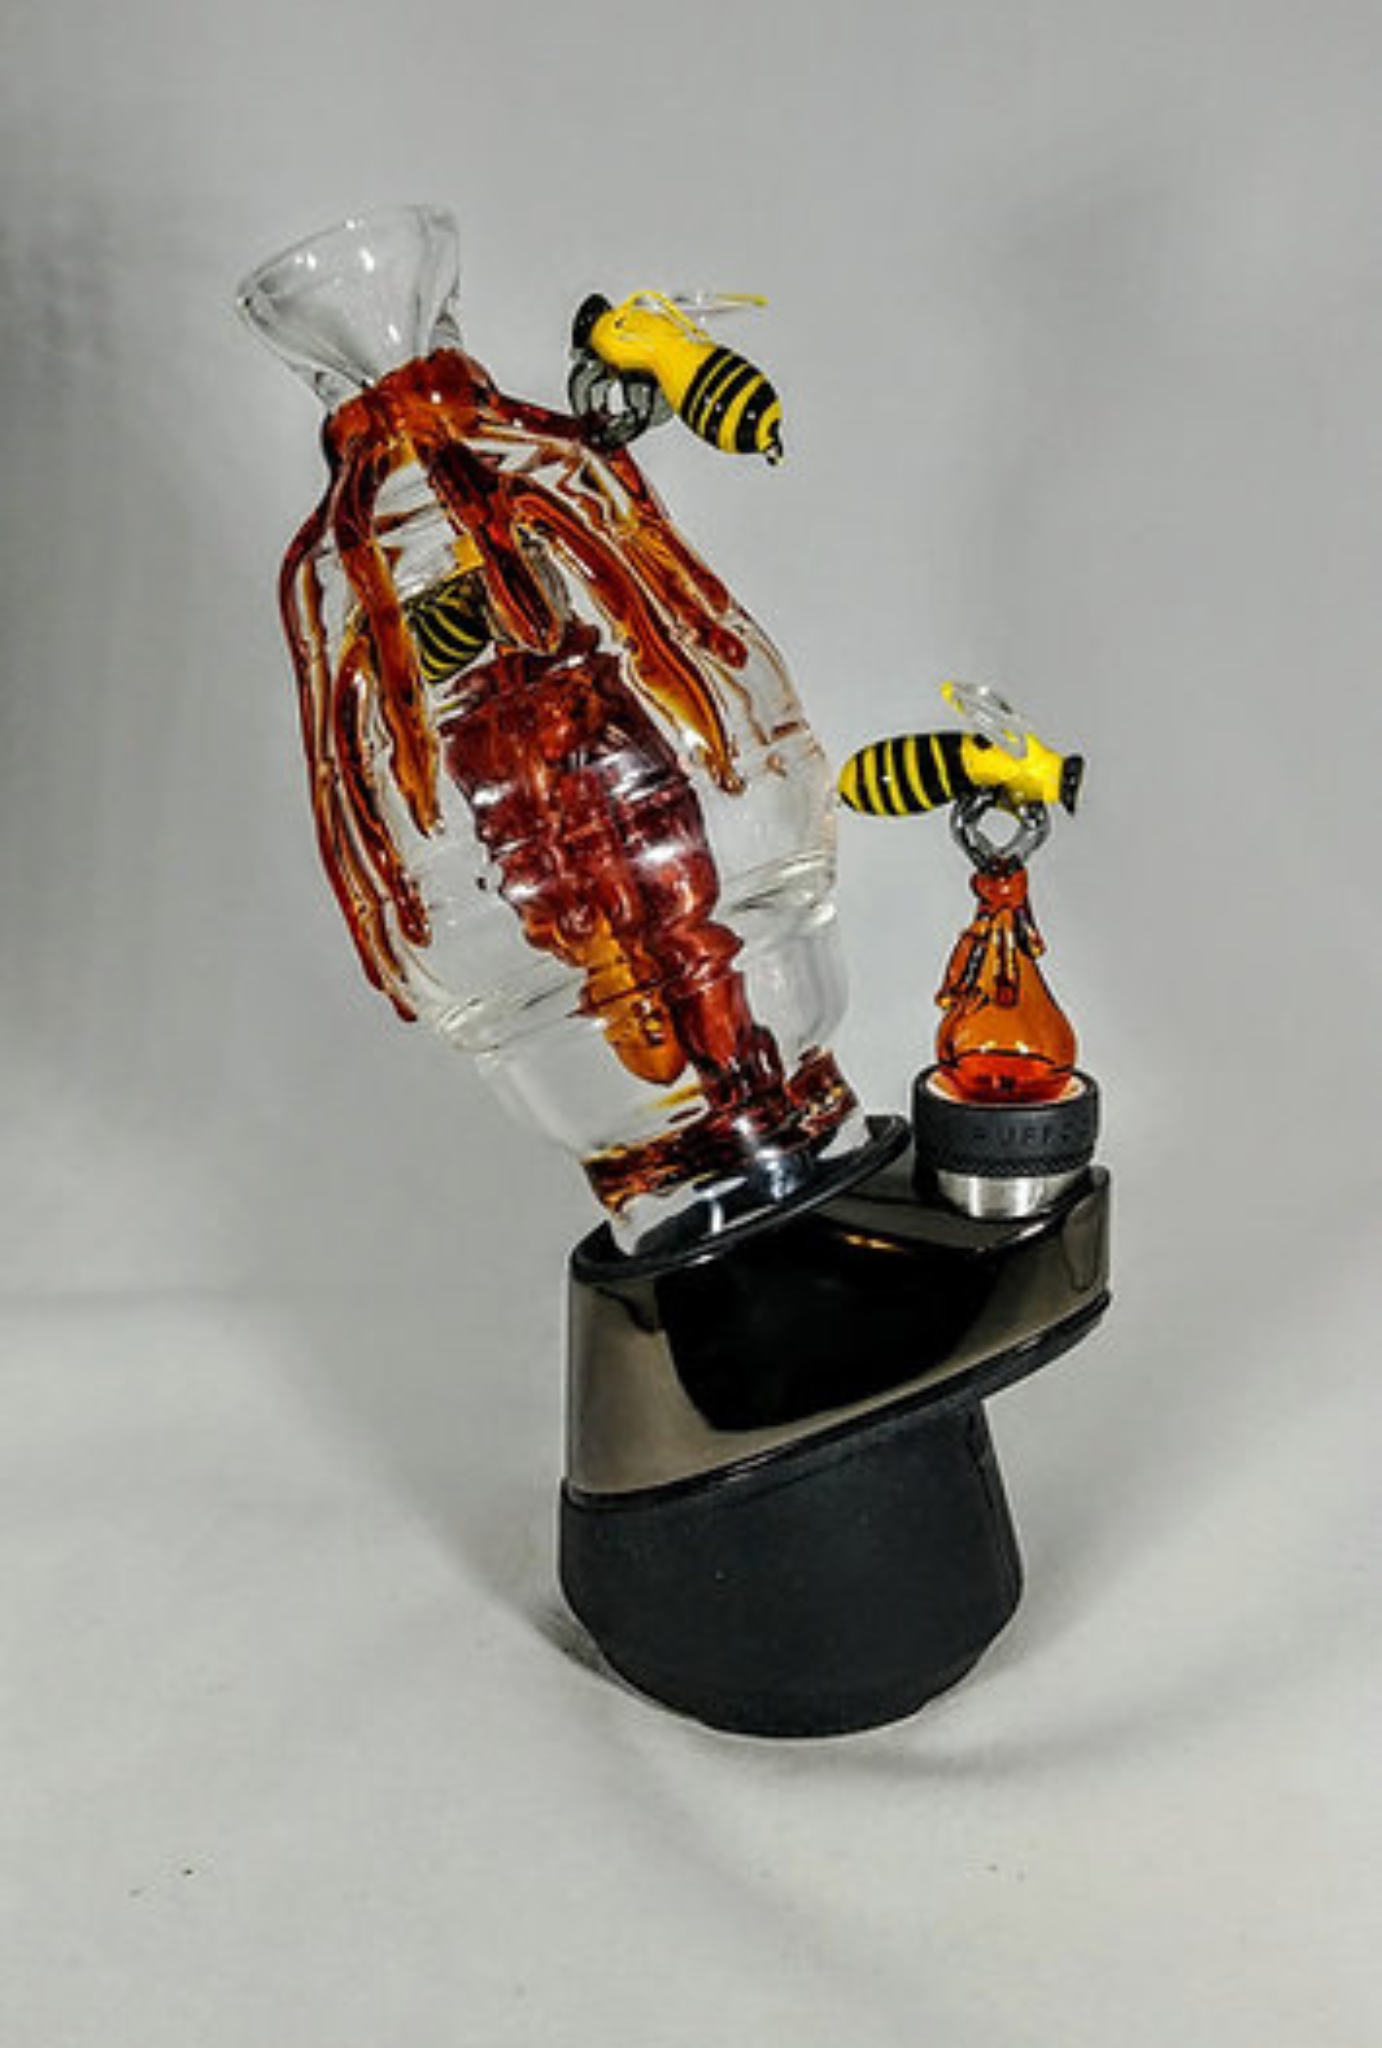 files/Beehive_Drip_With_Beez_Puffco_Attachment_with_LED_-_GiggleGlass-1199127.png